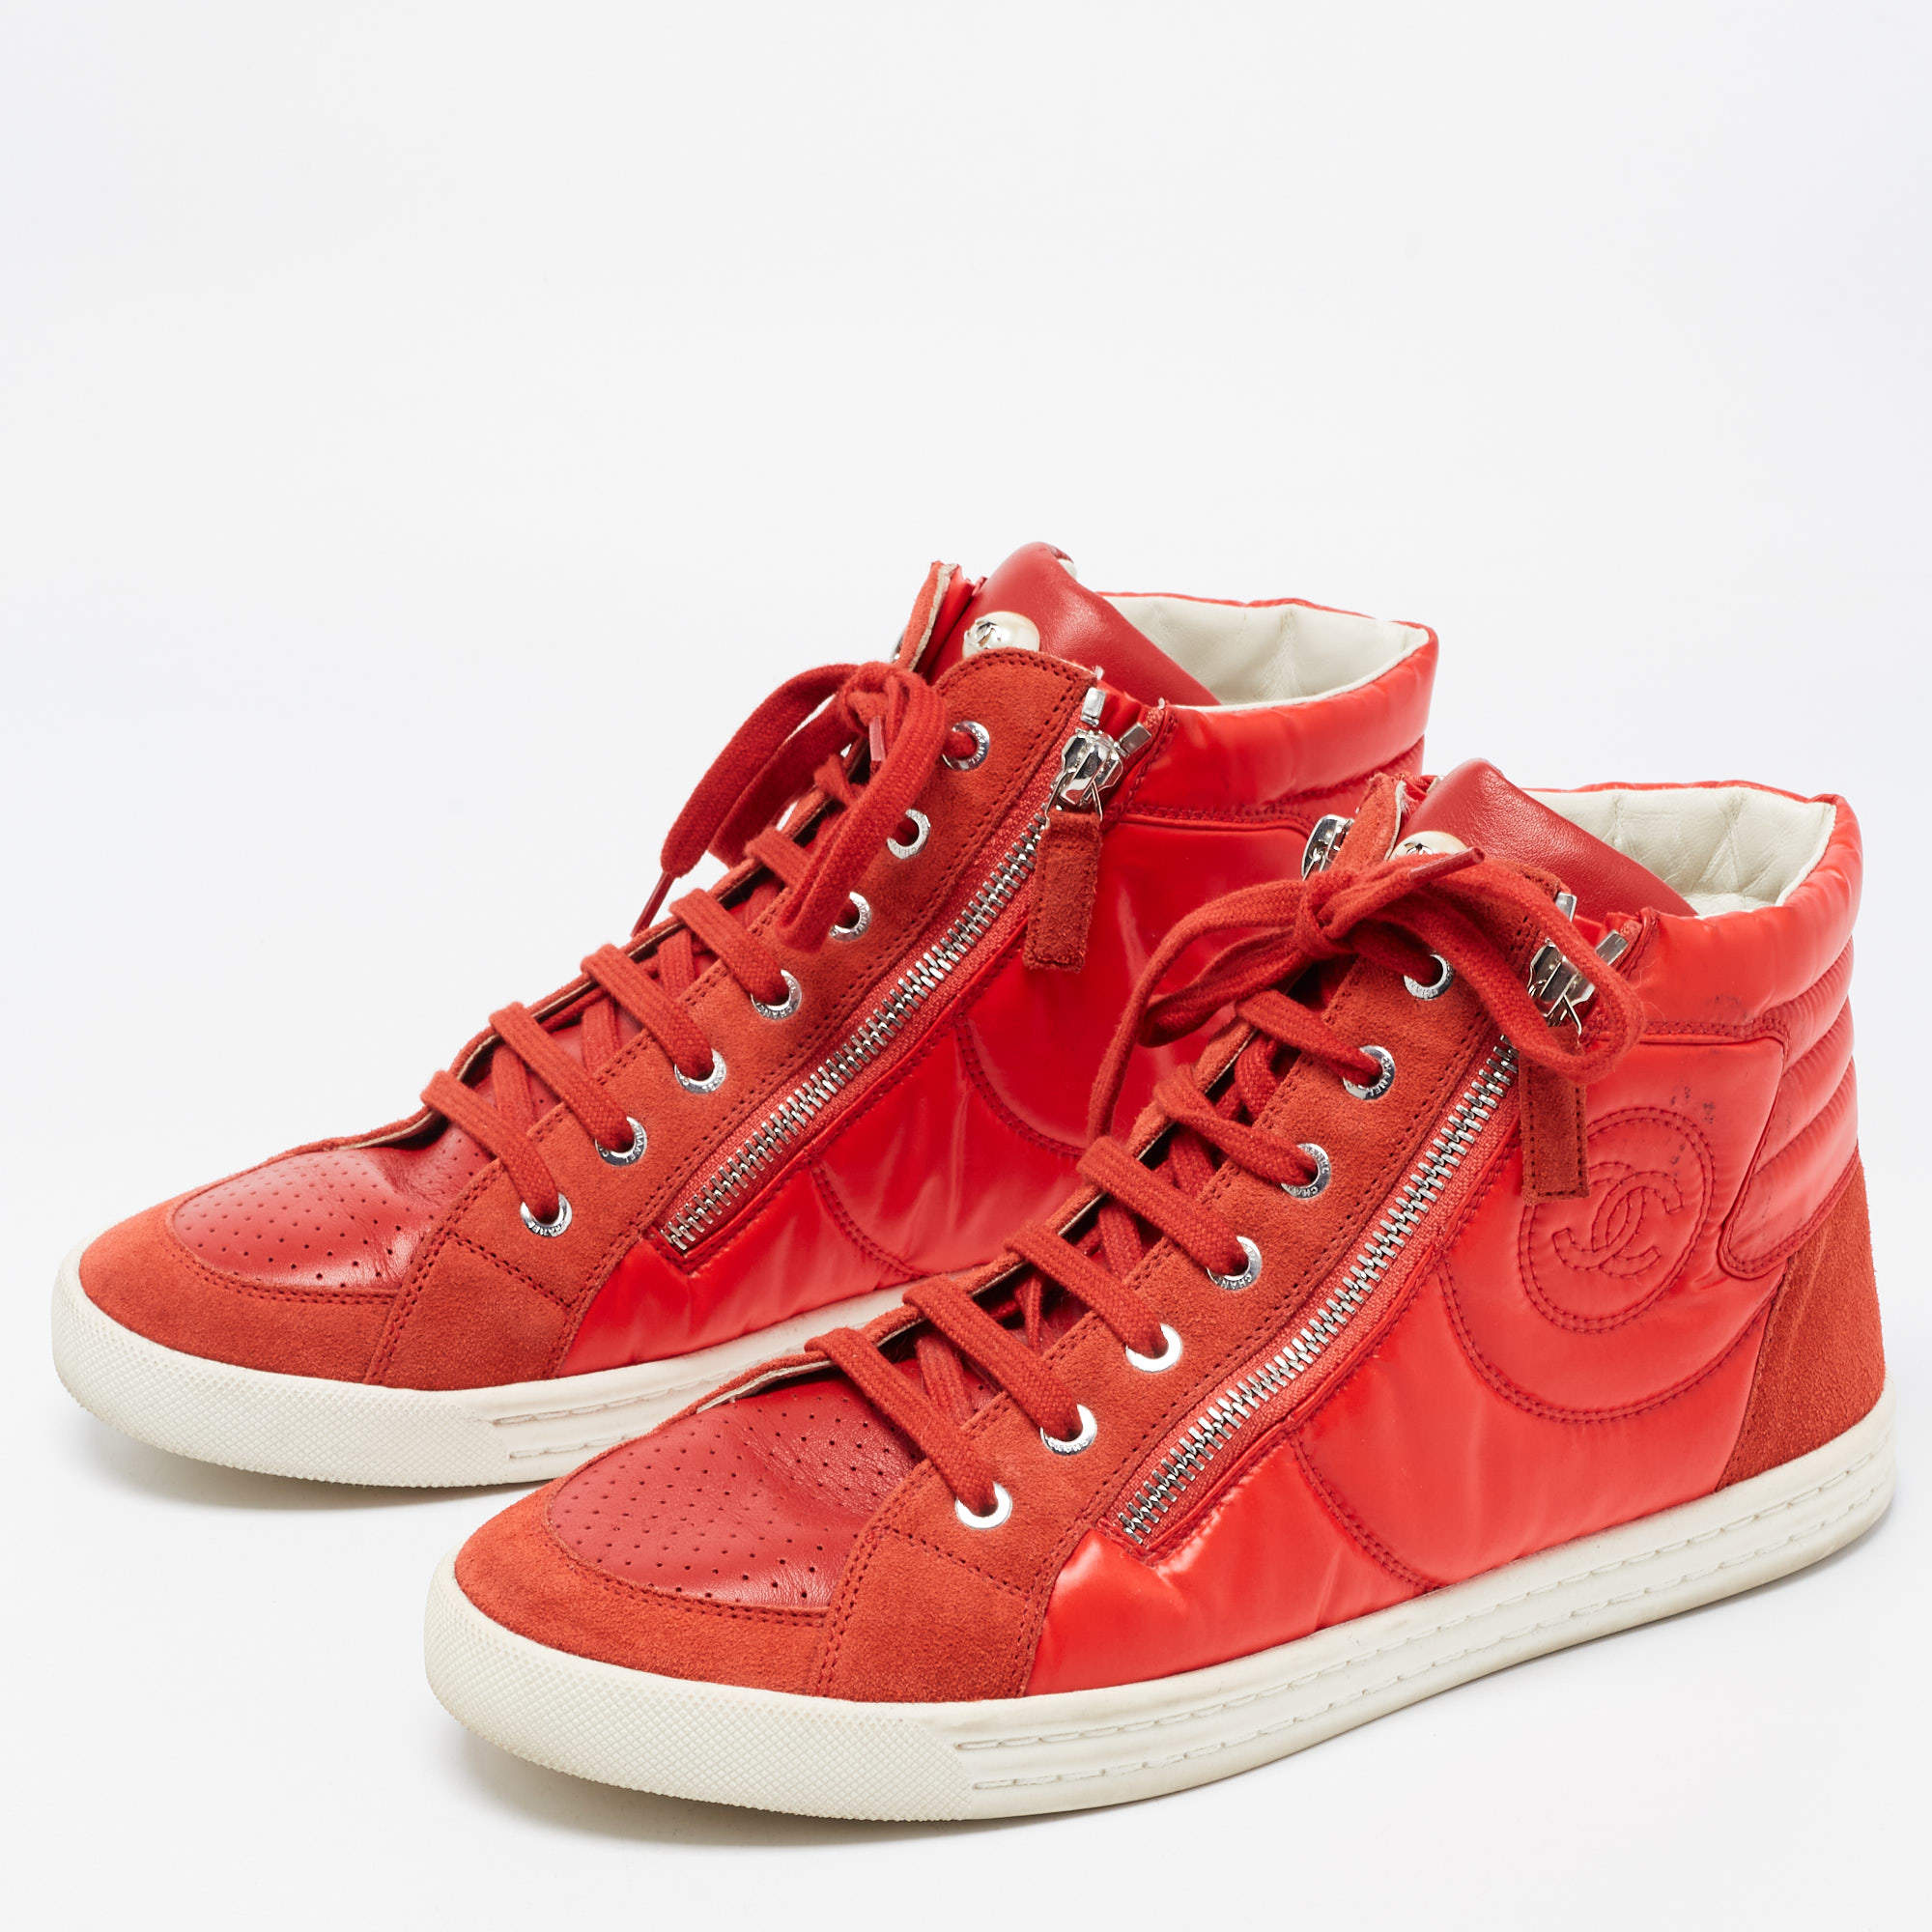 Chanel Red Leather and Nylon CC High Top Sneakers Size 41